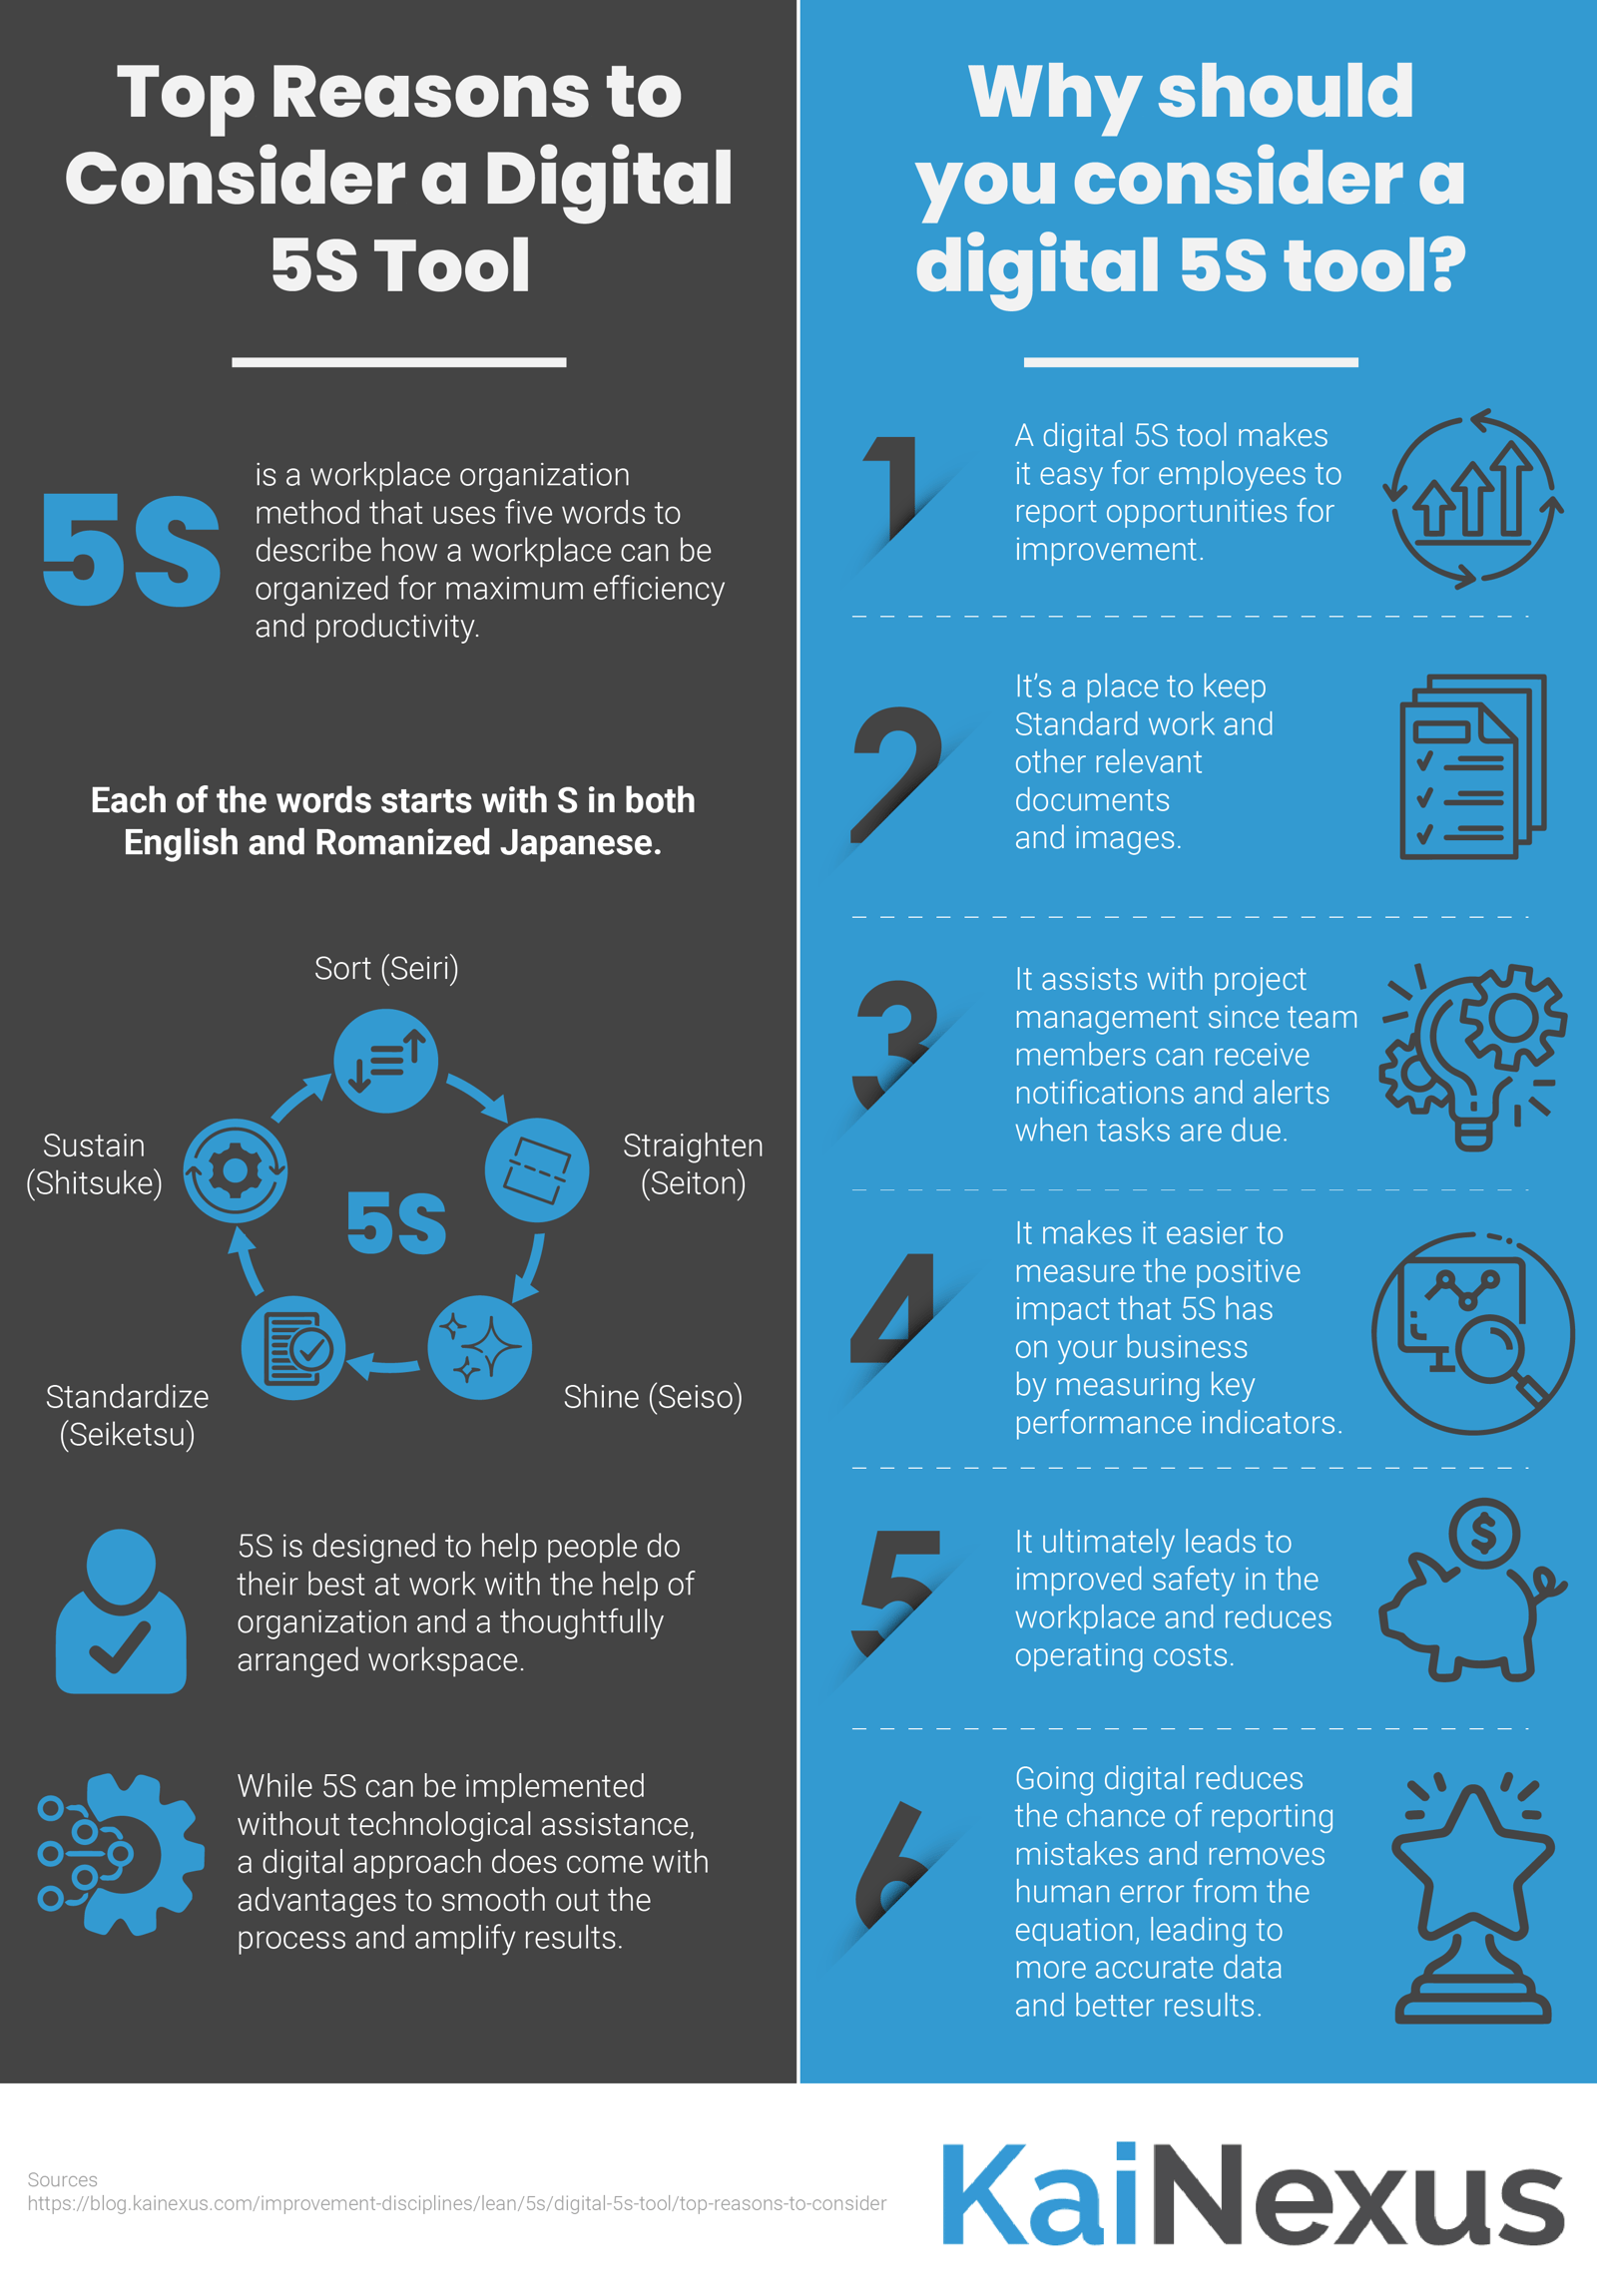 Top Reasons to Consider a Digital 5S Tool Infographic